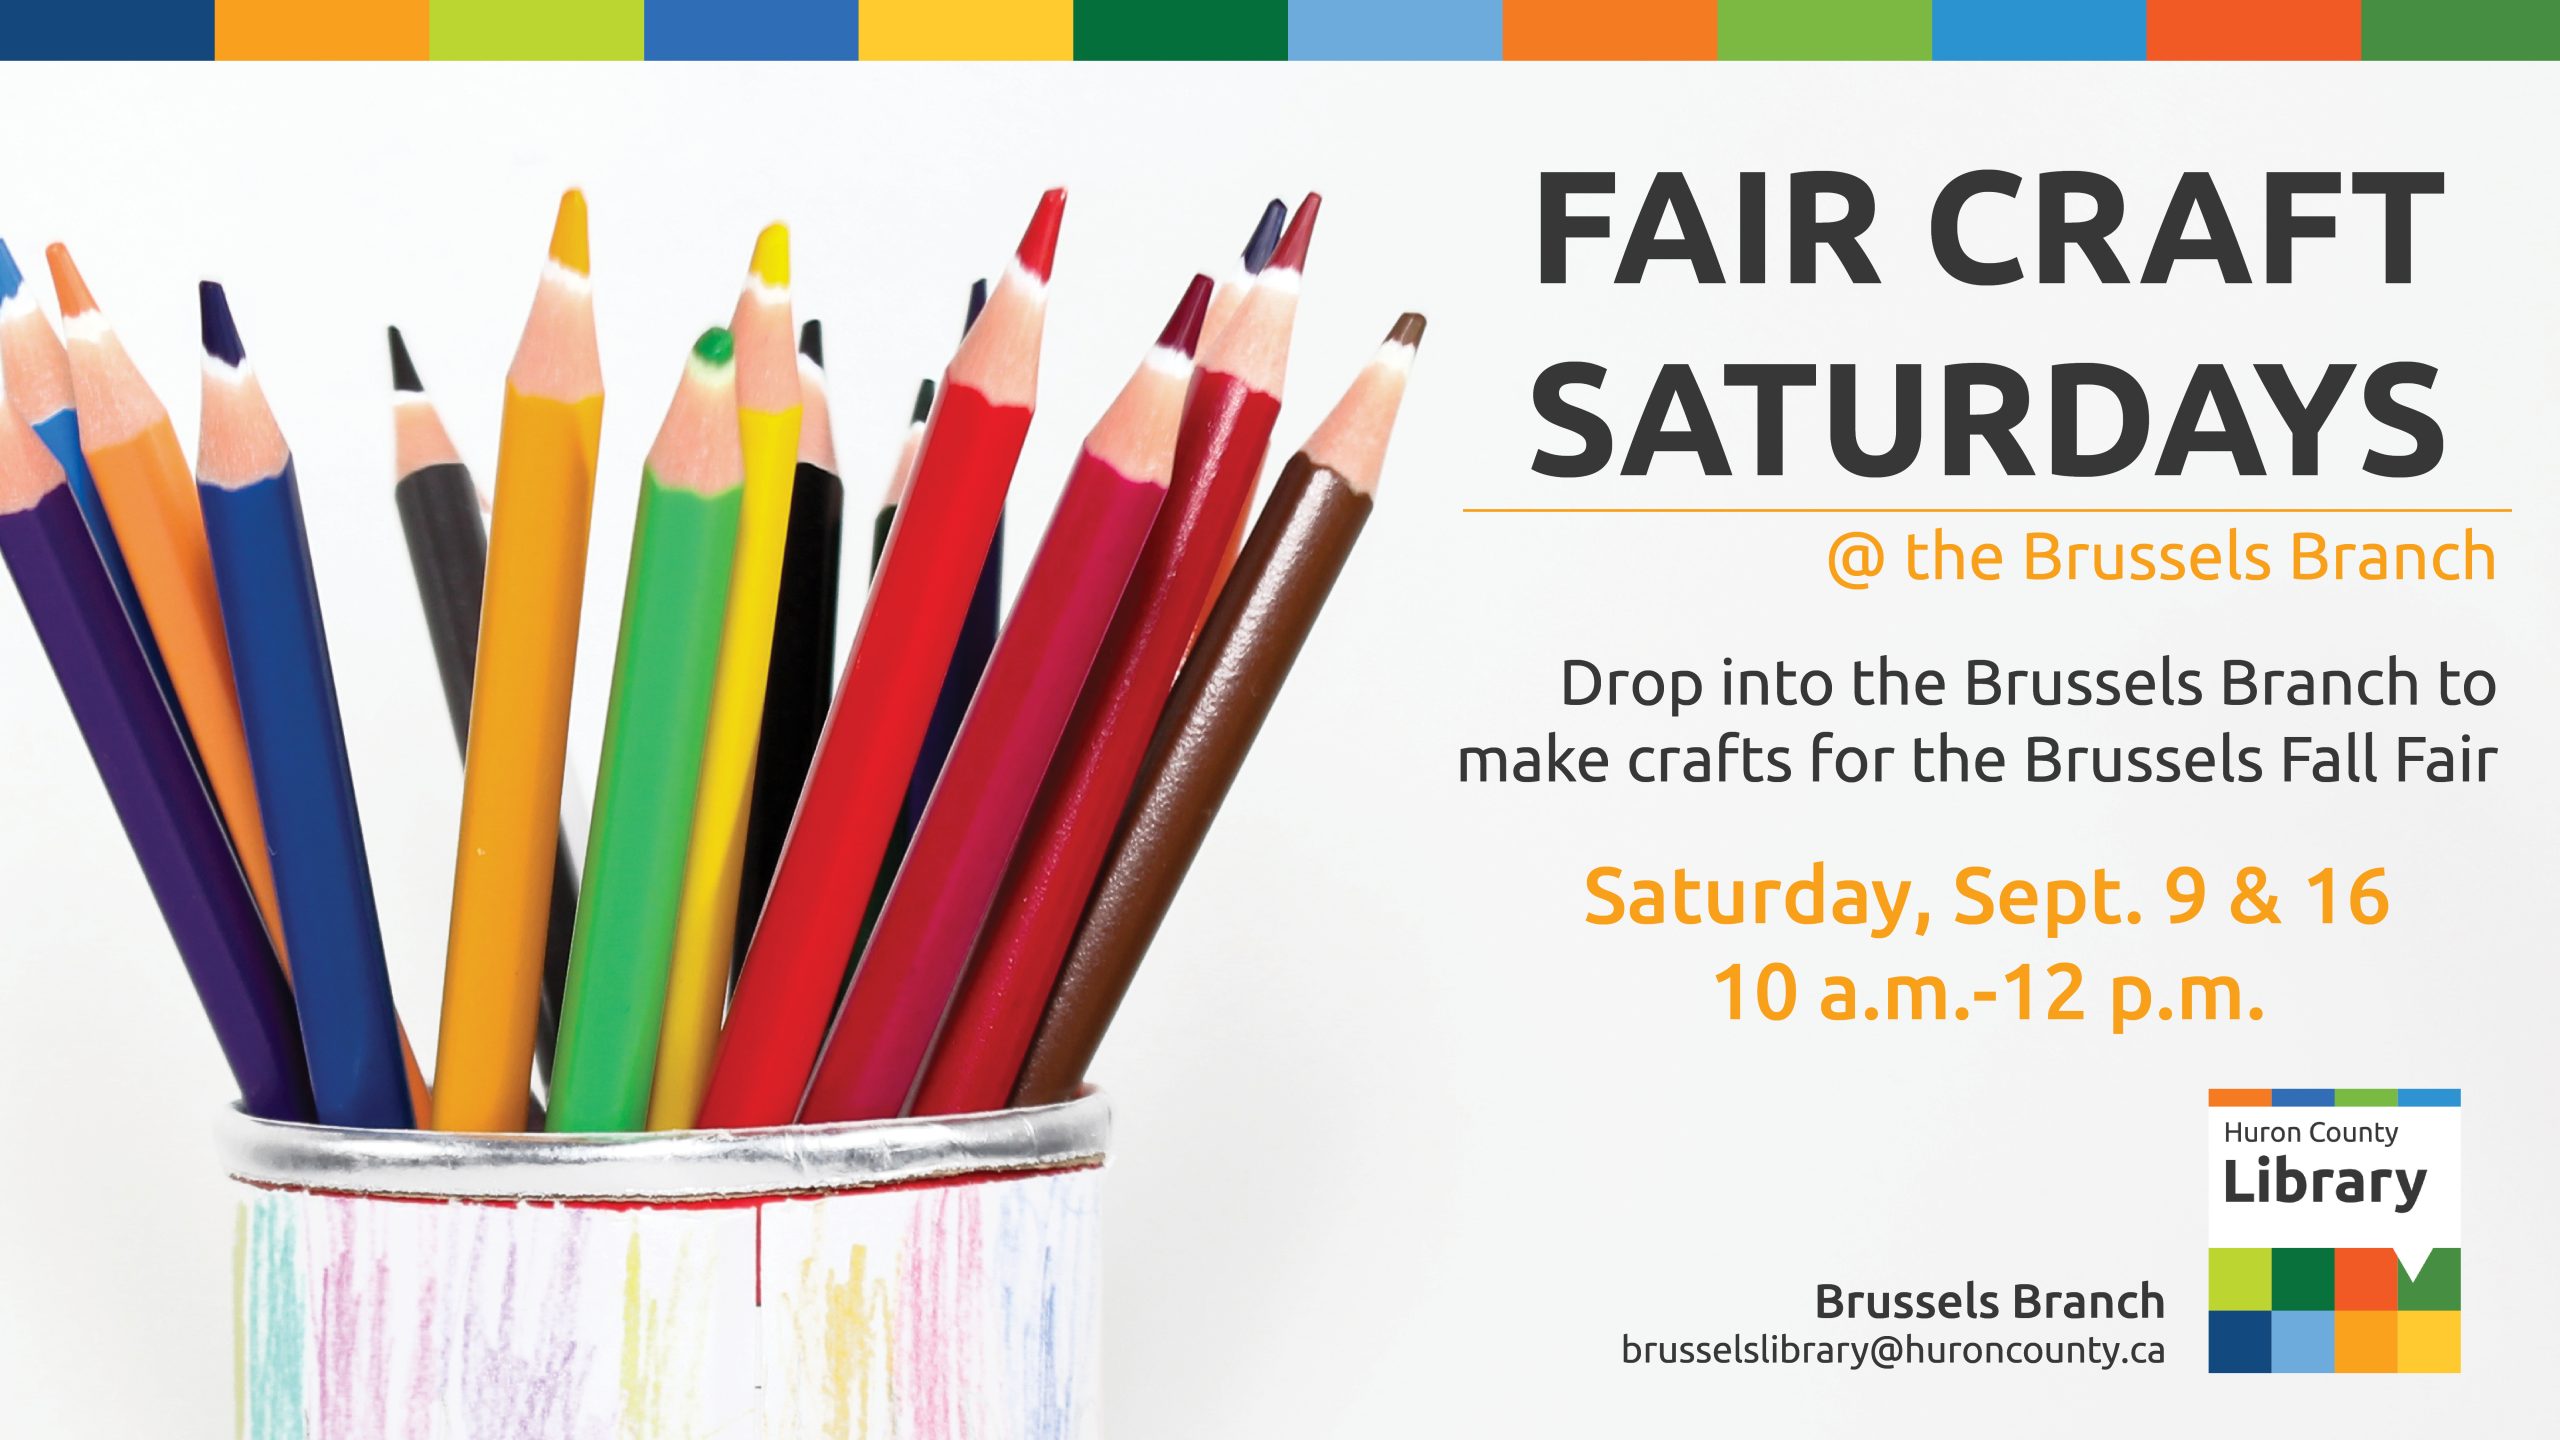 Image of a can with different coloured pencil crayons. Text promoted Fair Craft Saturdays at Brussels Branch